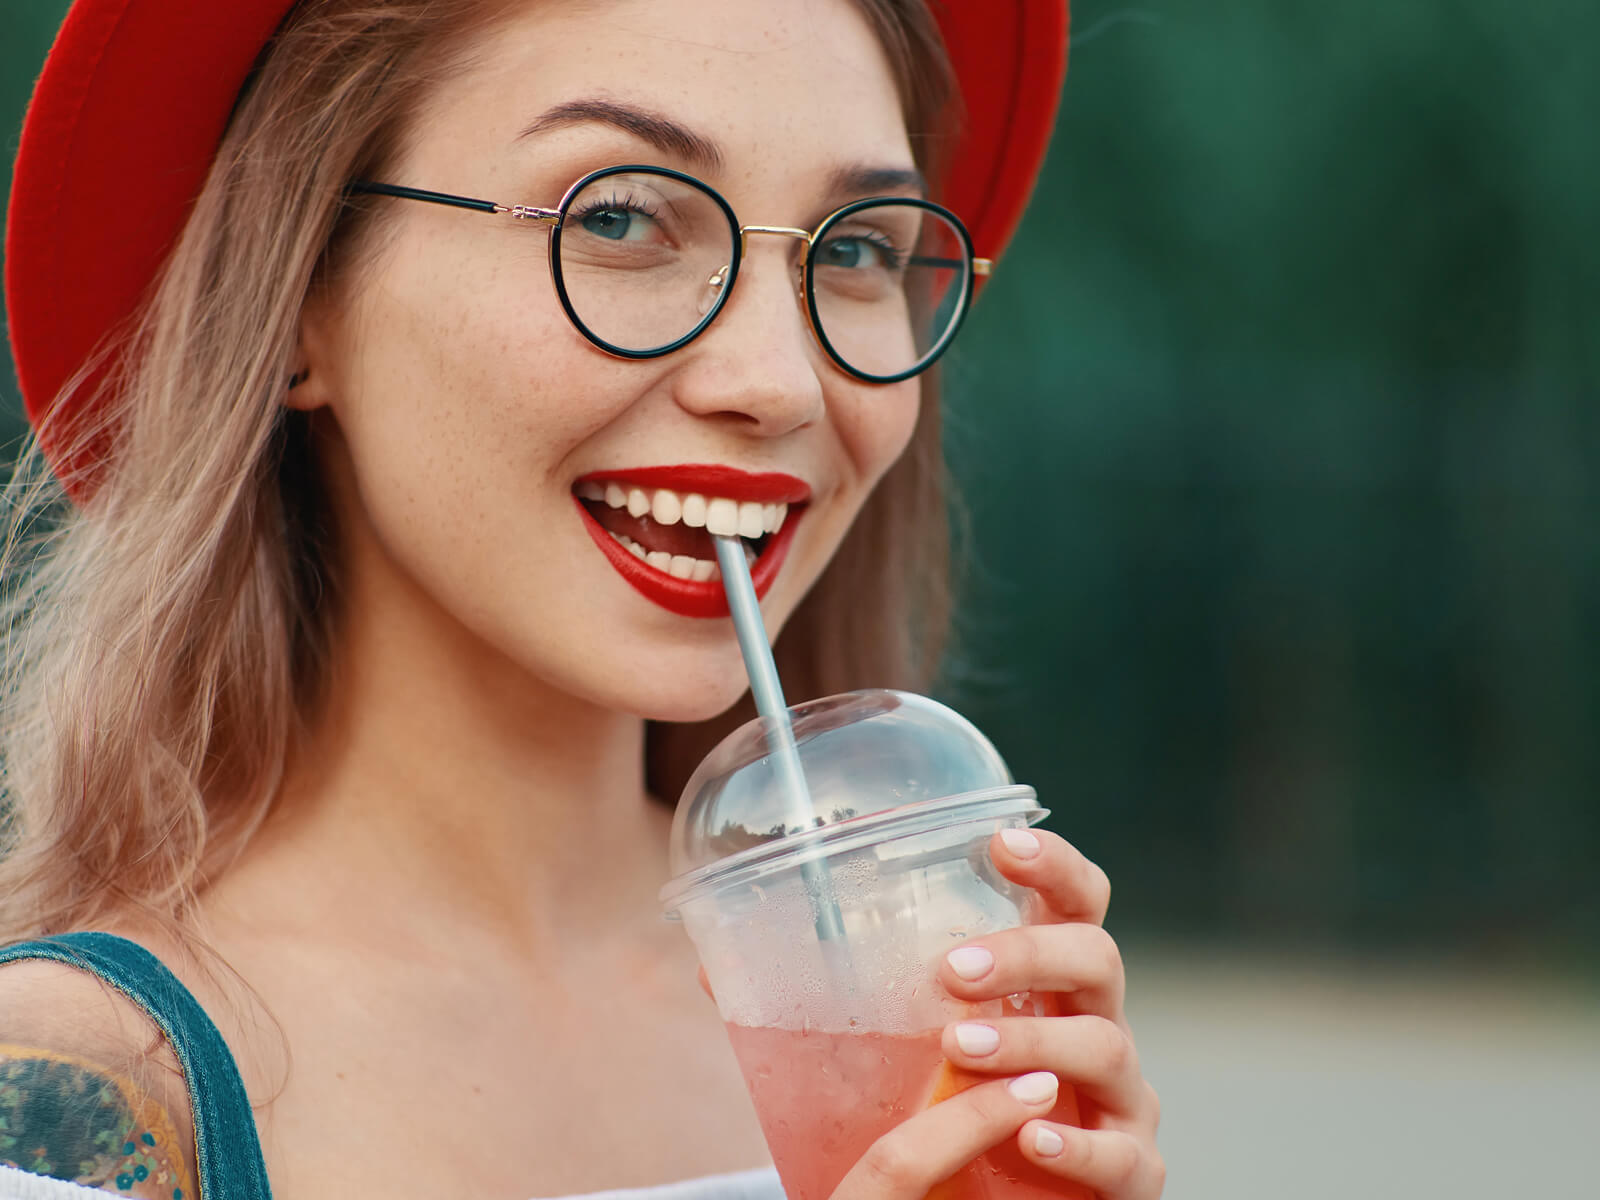 Is Drinking Through a Straw Better for Your Teeth?